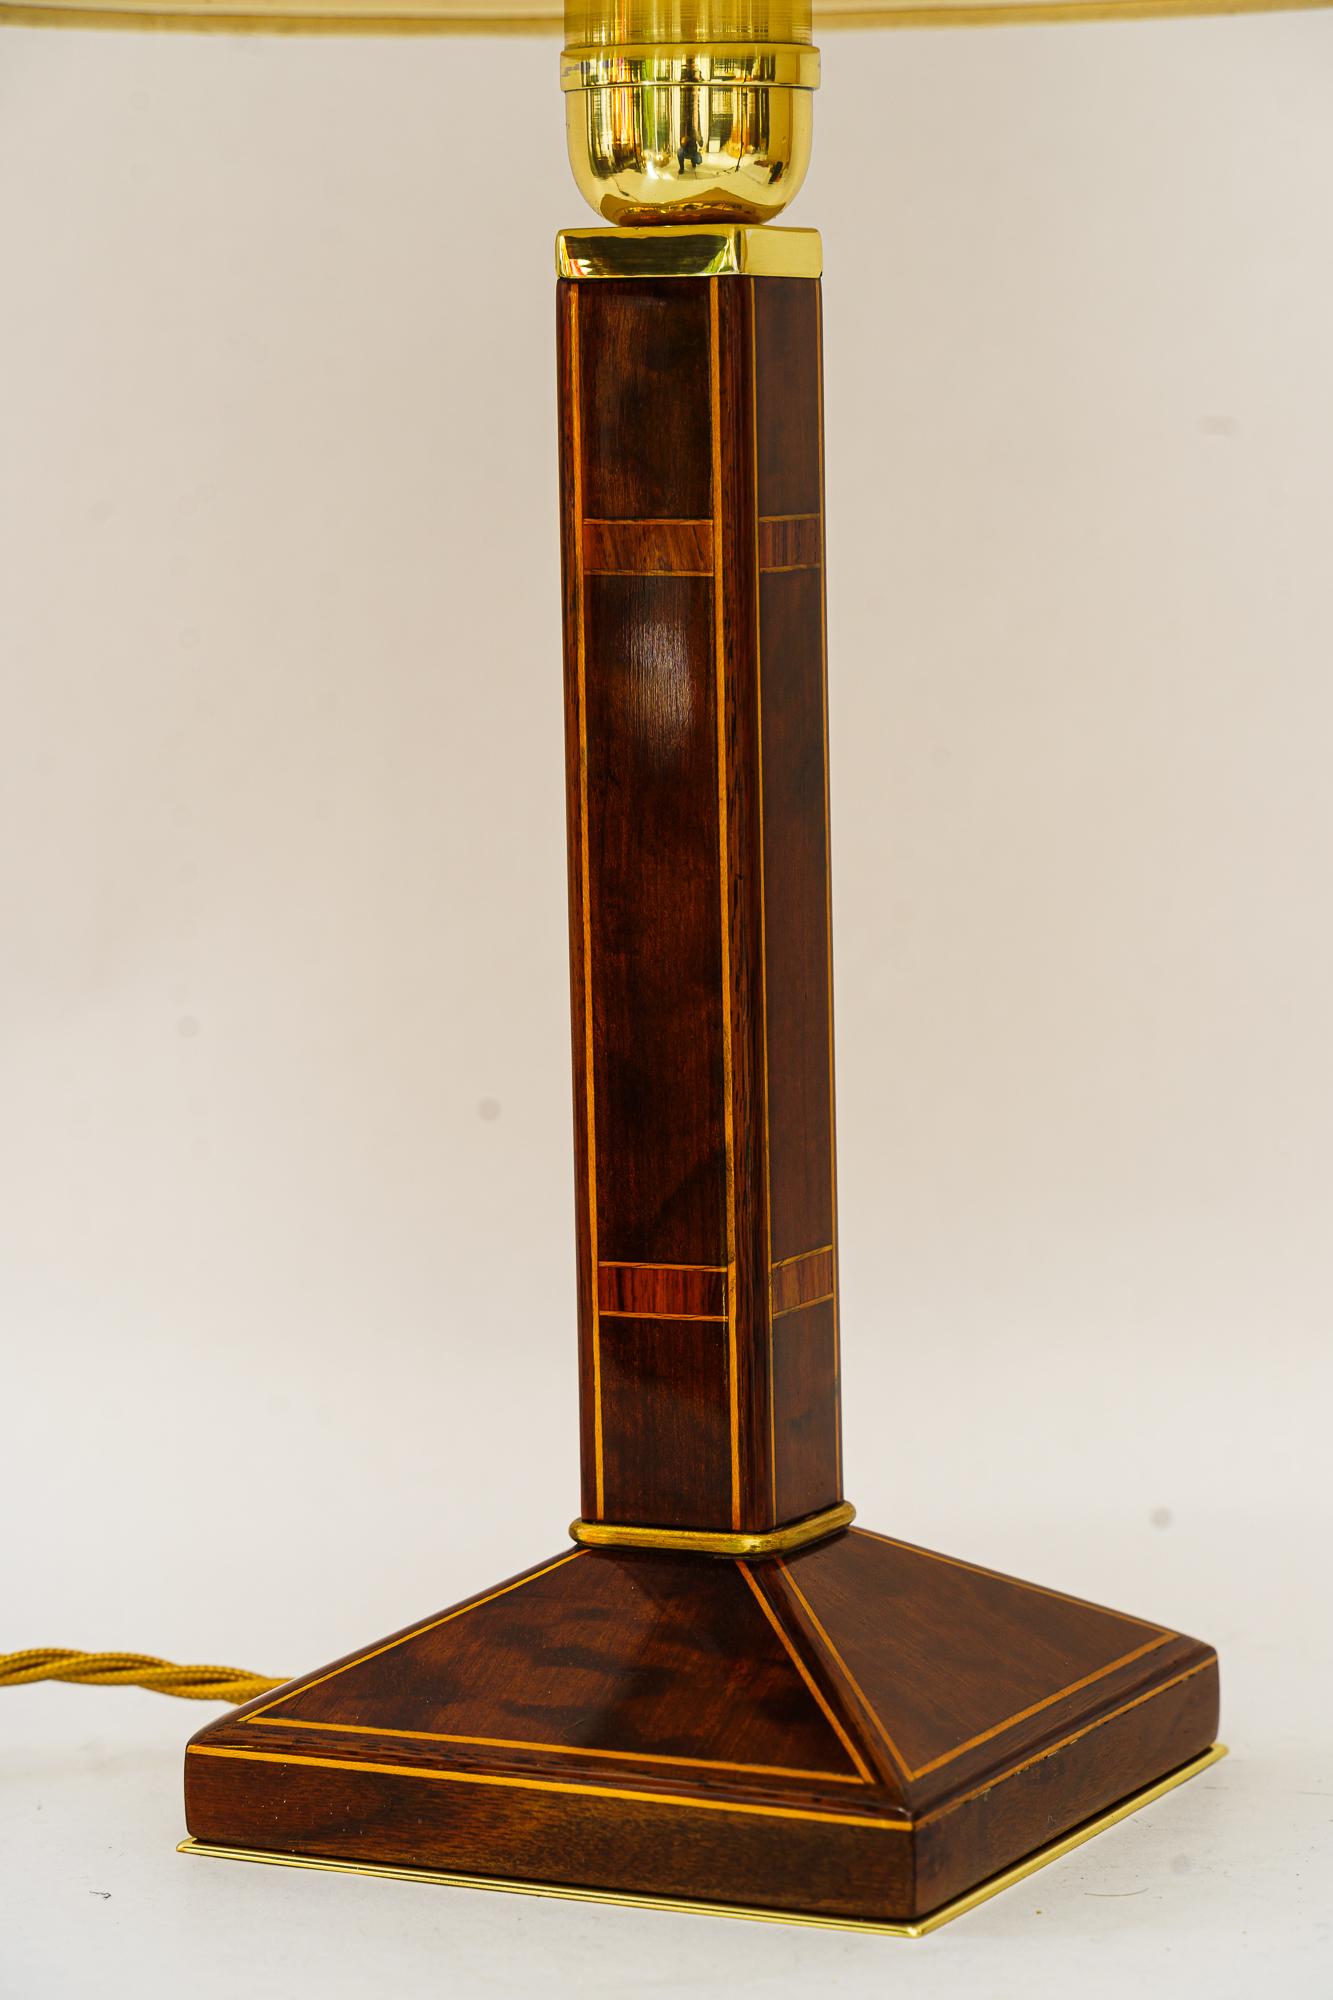 Big Art deco Table lamp wood with inlay vienna around 1920s
Polished and stove enameled
The fabric shade is replaced ( new )